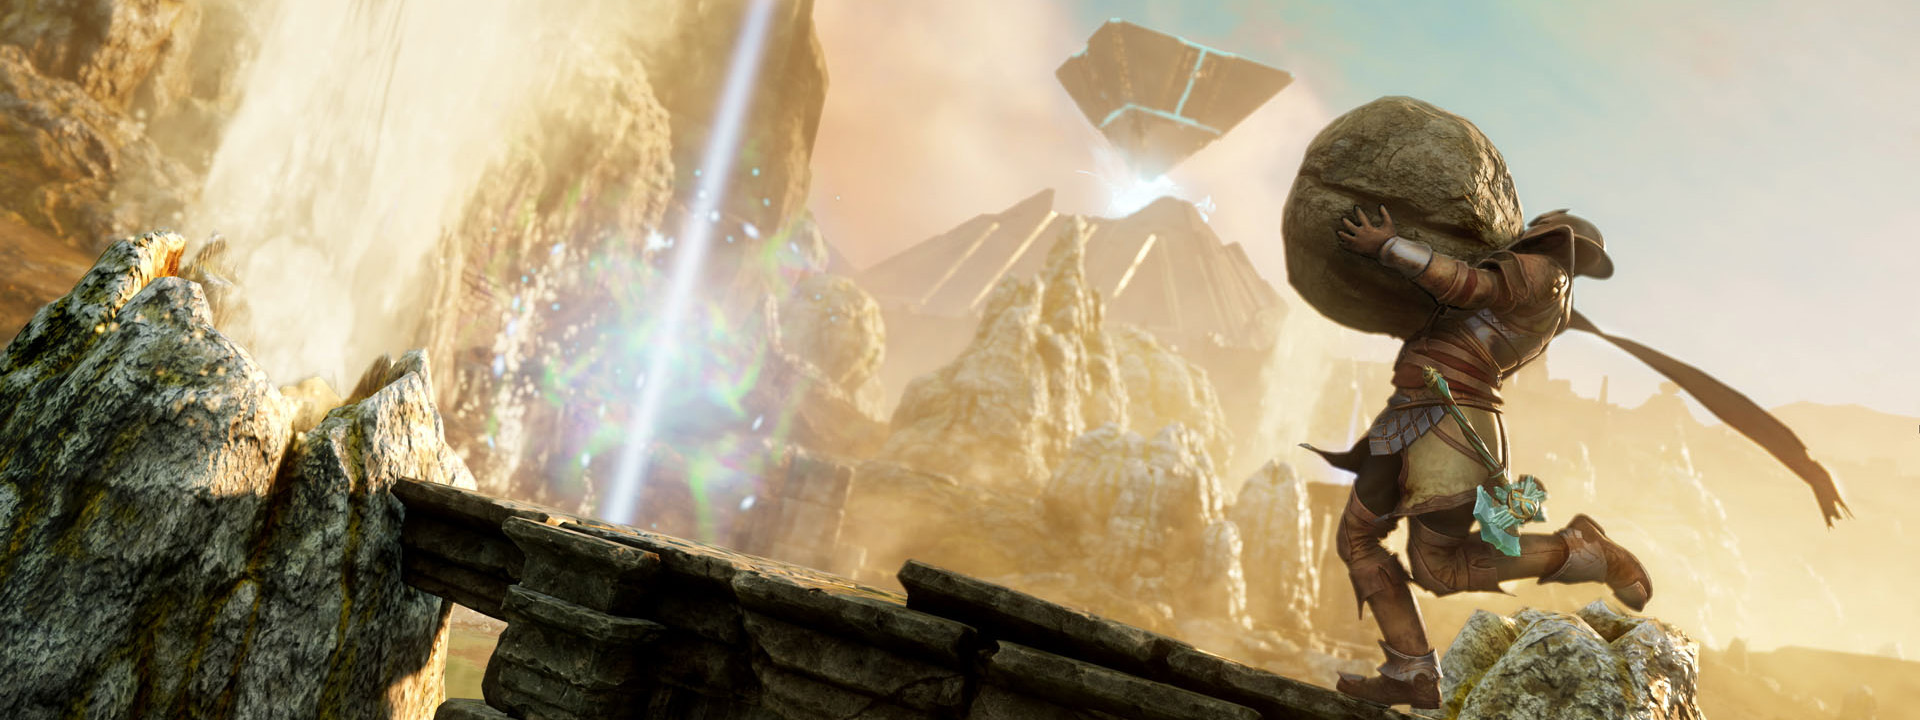 An Adventurer wearing desert clothing carries a rock up a hill in front of the Ennead in Brimstone Sands.